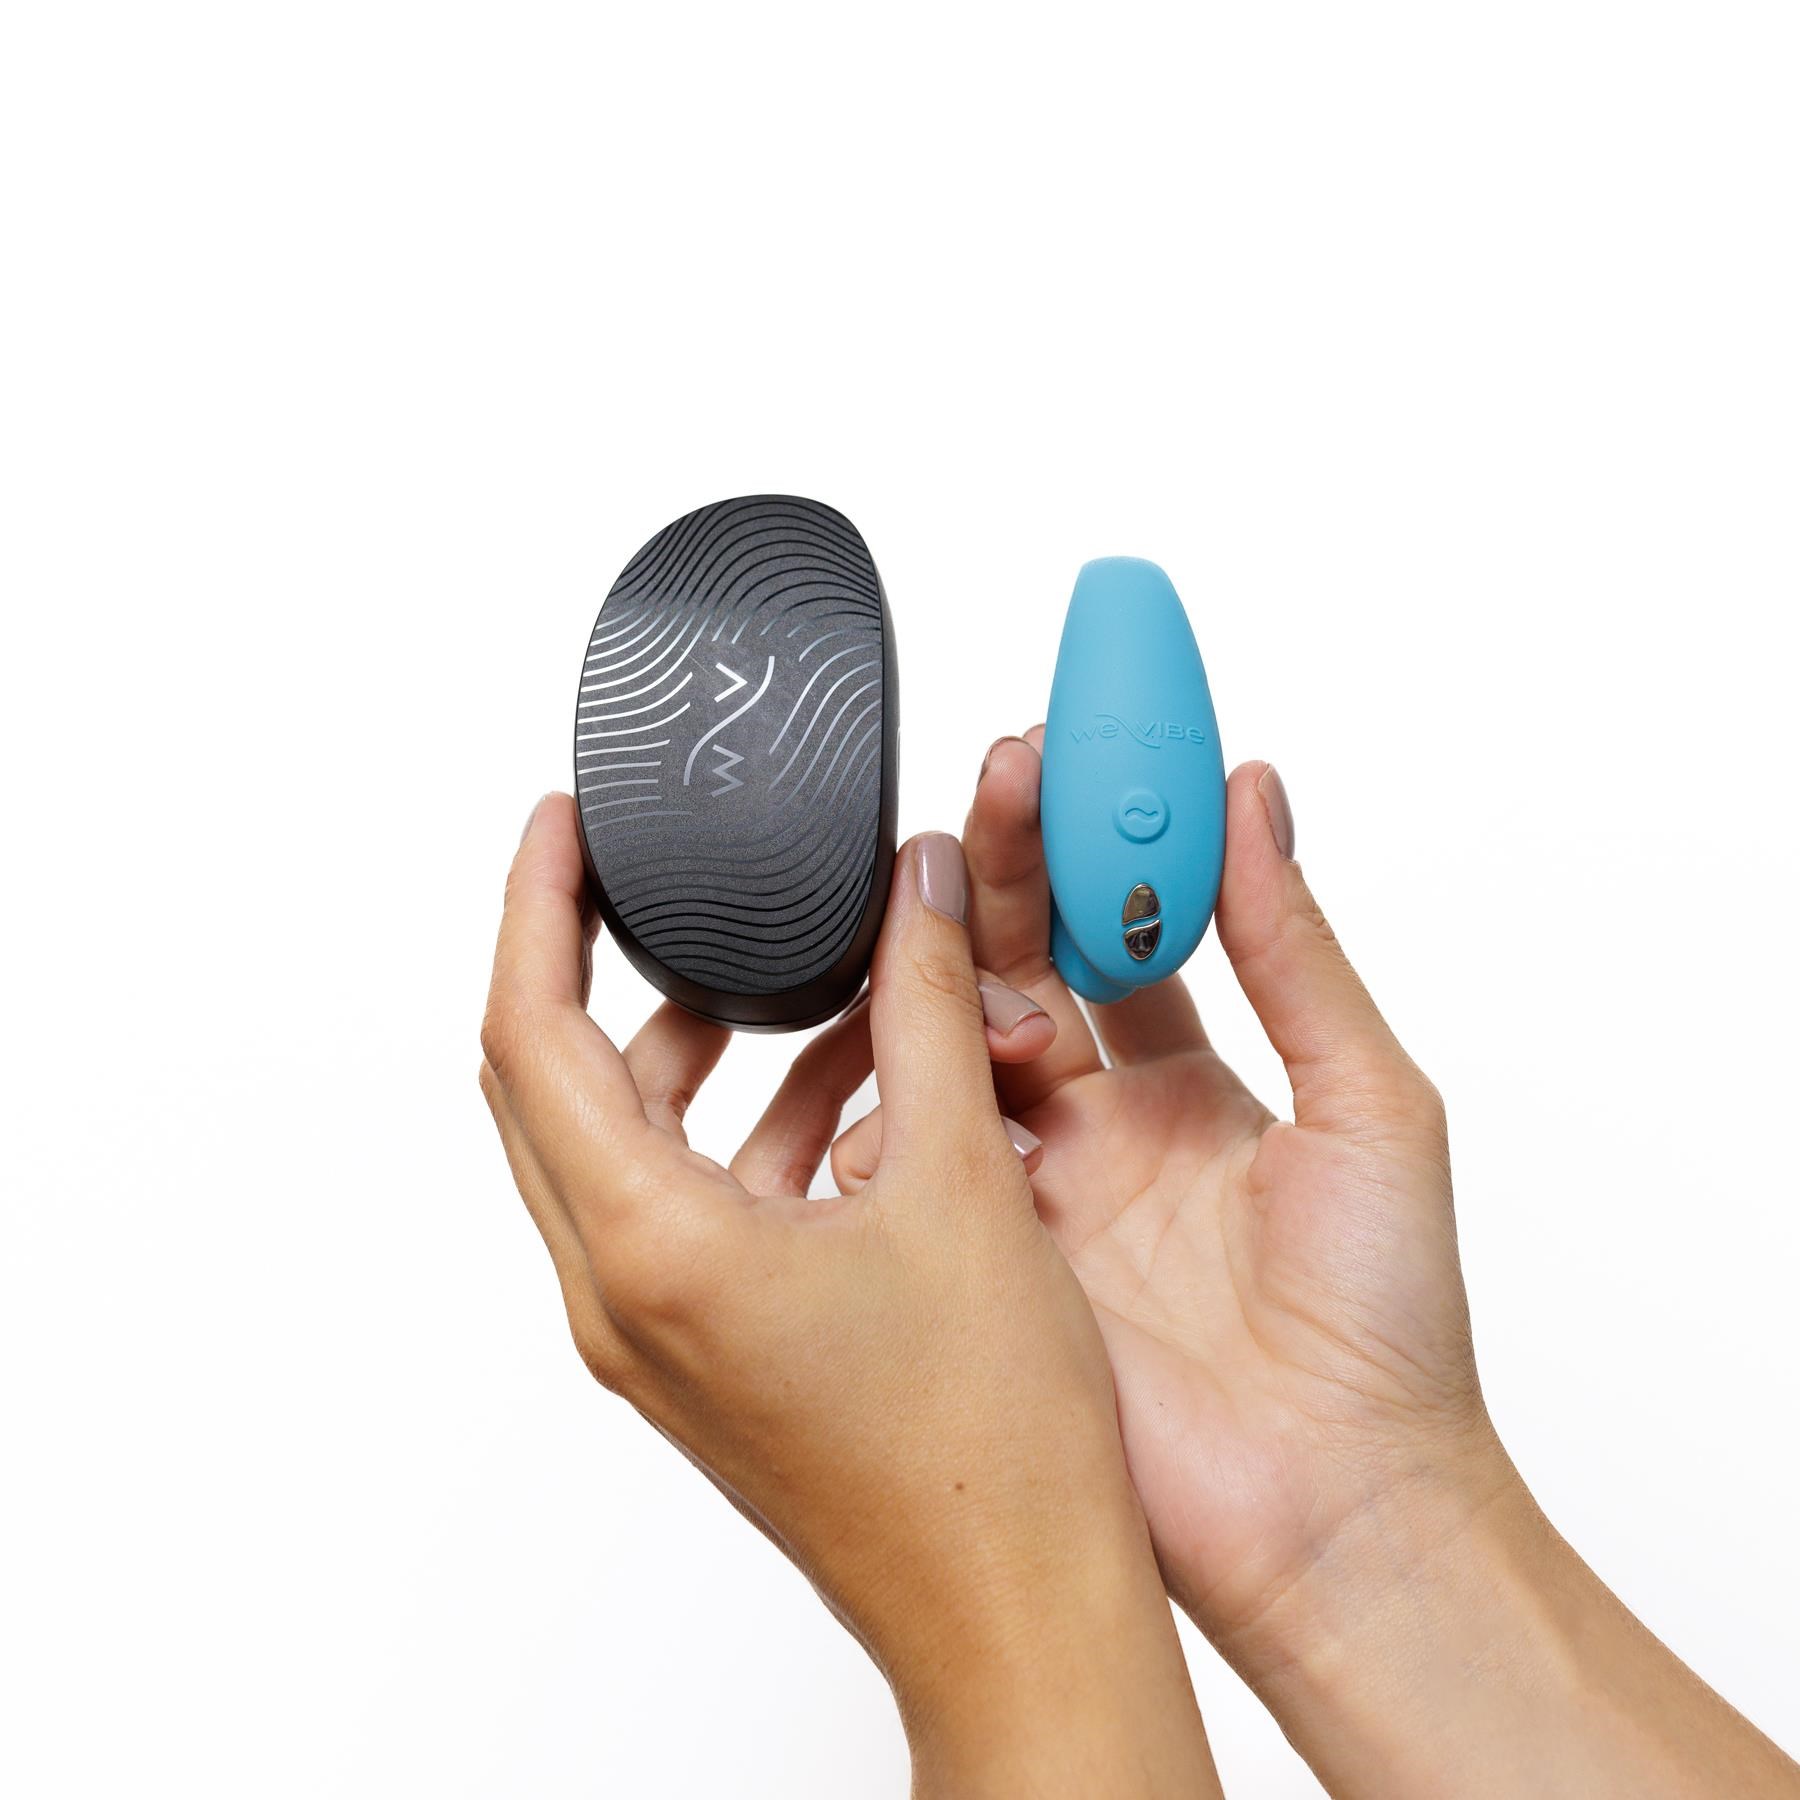 We-Vibe Sync Go Couples Vibrator- Hand Shot to Show Size